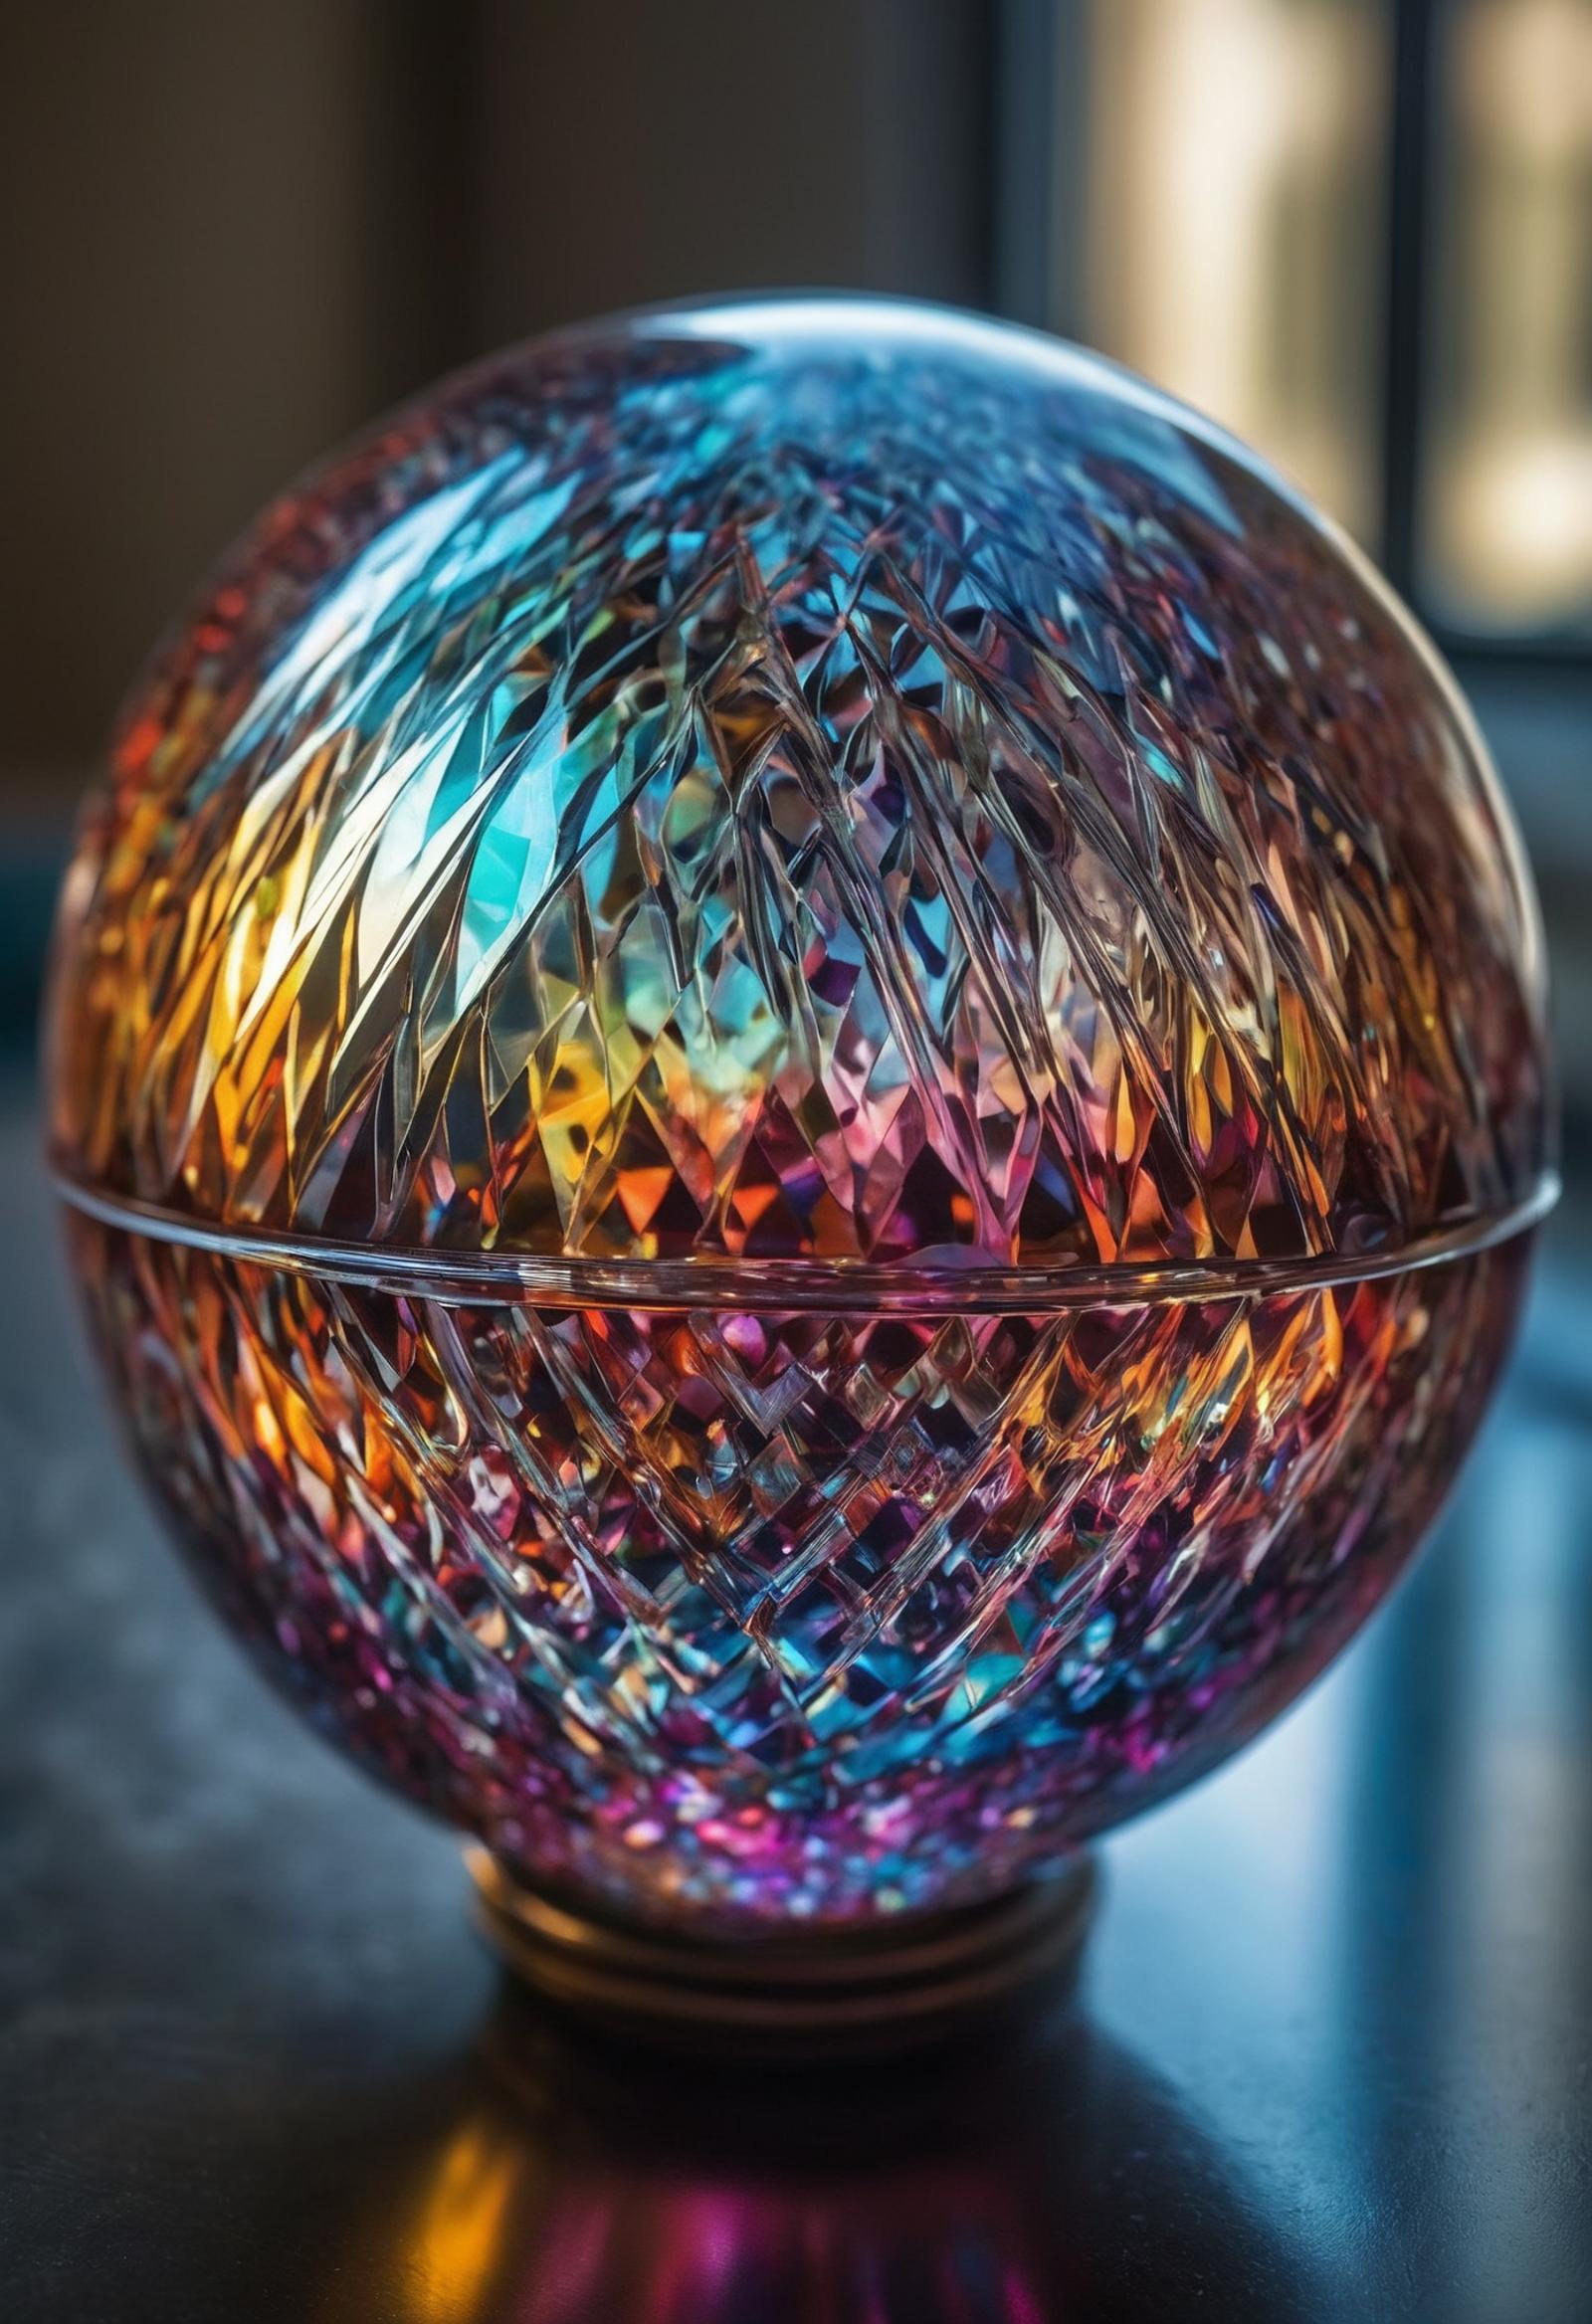 A closeup of a colorful glass ball with an intricate pattern.